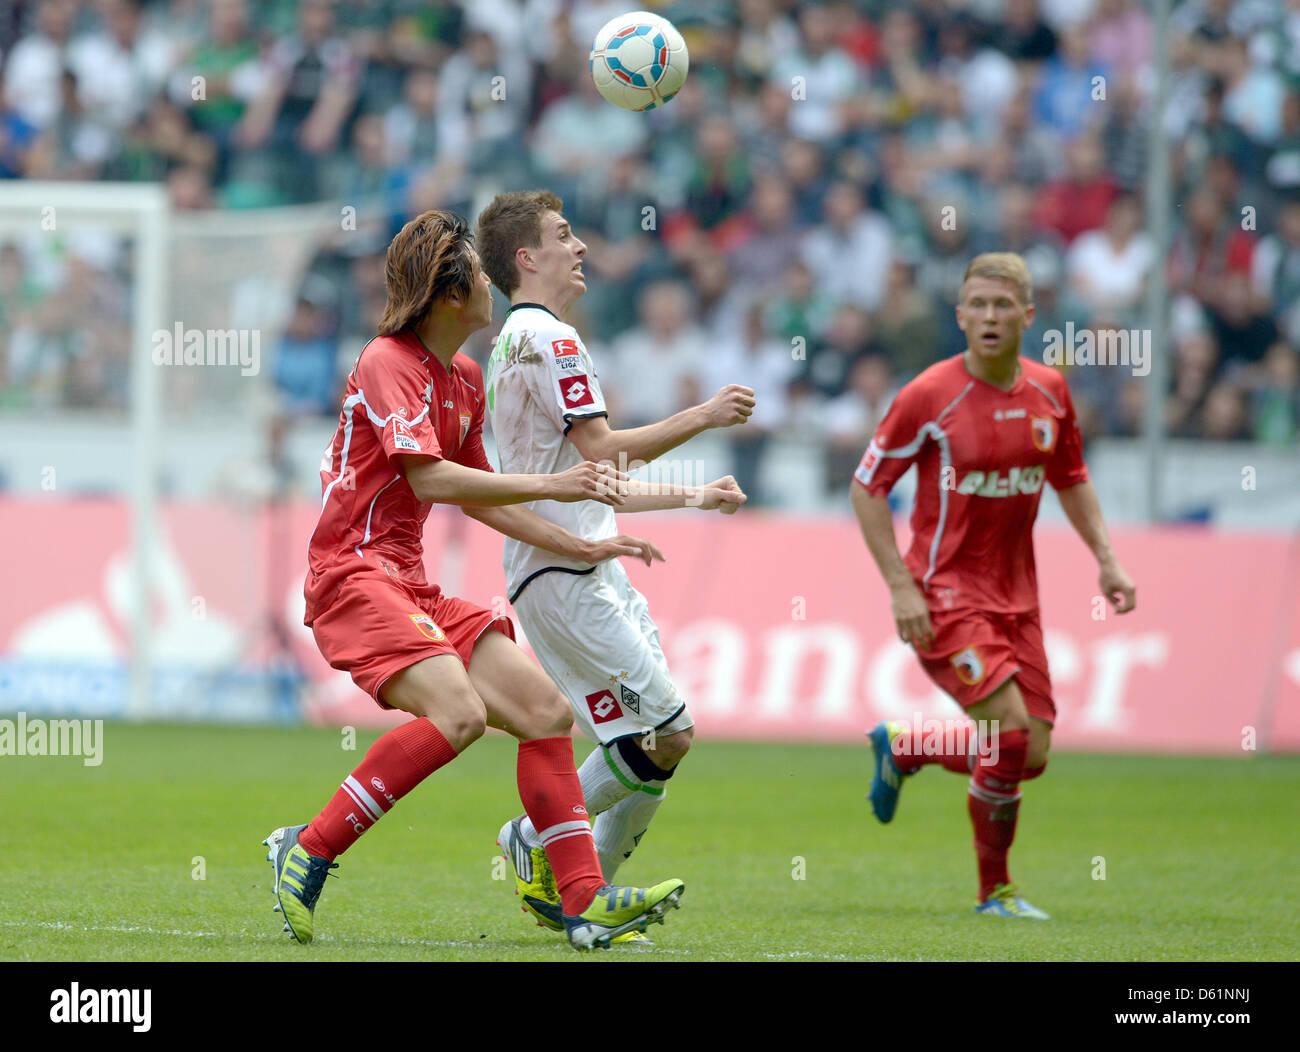 Gladbach's Patrick Herrmann (C) vies for the ball with Augsburg's Ja-Cheol Koo during the Bundesliga soccer match between Borussia Moenchengladbach and FC Augsburg and waves at Borussia-Park in Moenchengladbach, Germany, 28 April 2012. Photo: FEDERICO GAMBARINI  (ATTENTION: EMBARGO CONDITIONS! The DFL permits the further utilisation of the pictures in IPTV, mobile services and othe Stock Photo